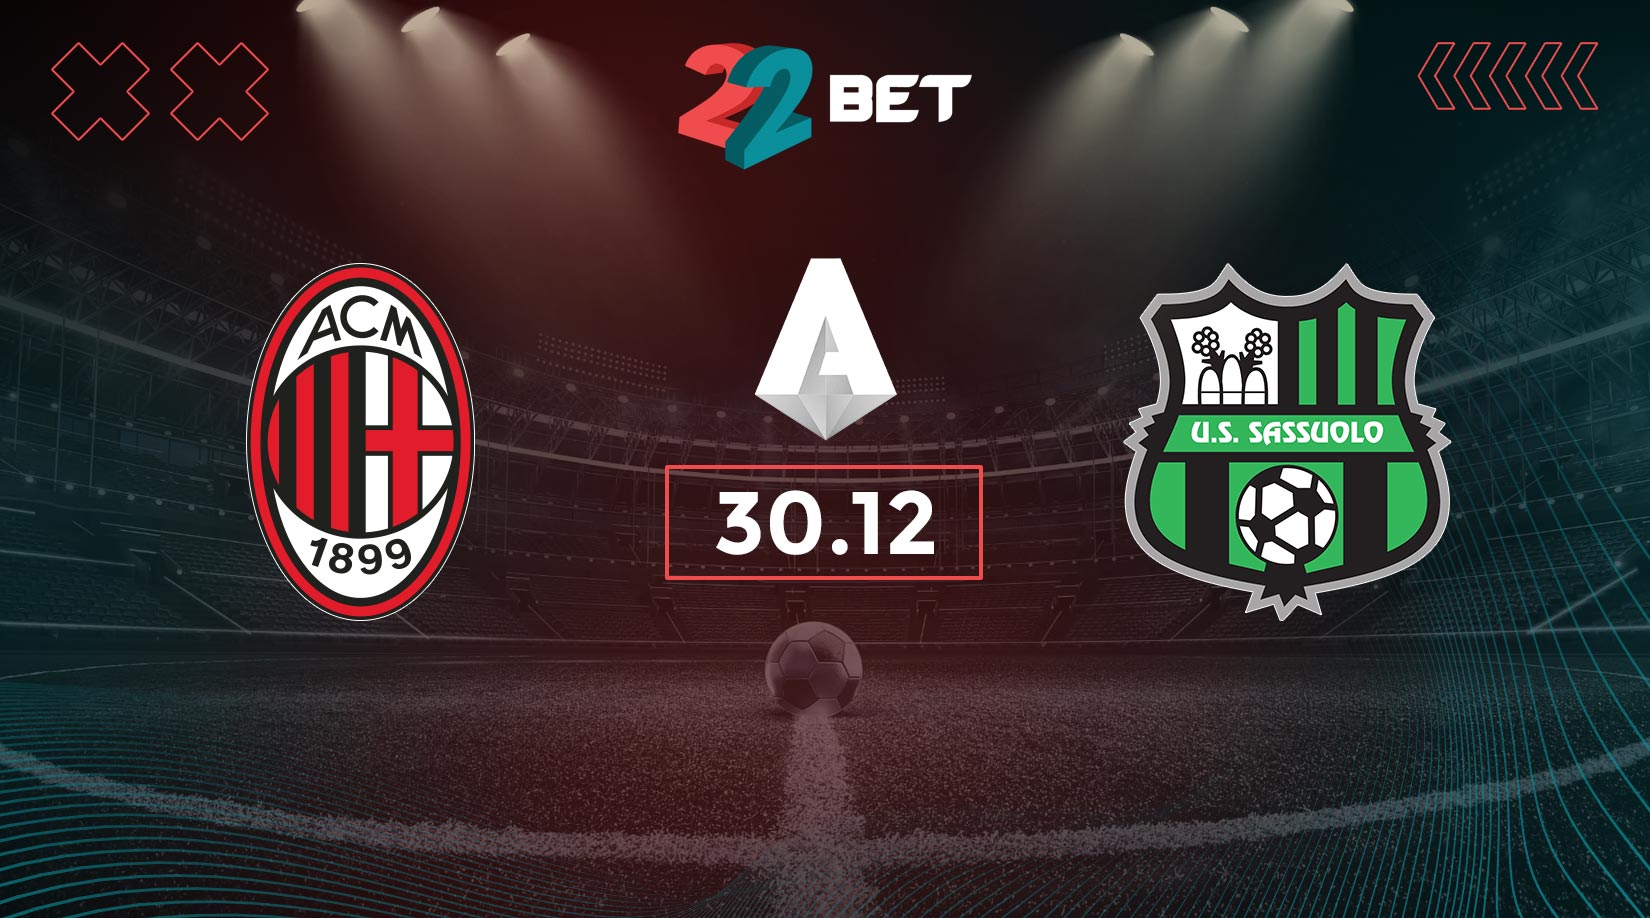 AC Milan vs US Sassuolo Prediction: Serie A Match on 30.12.2023